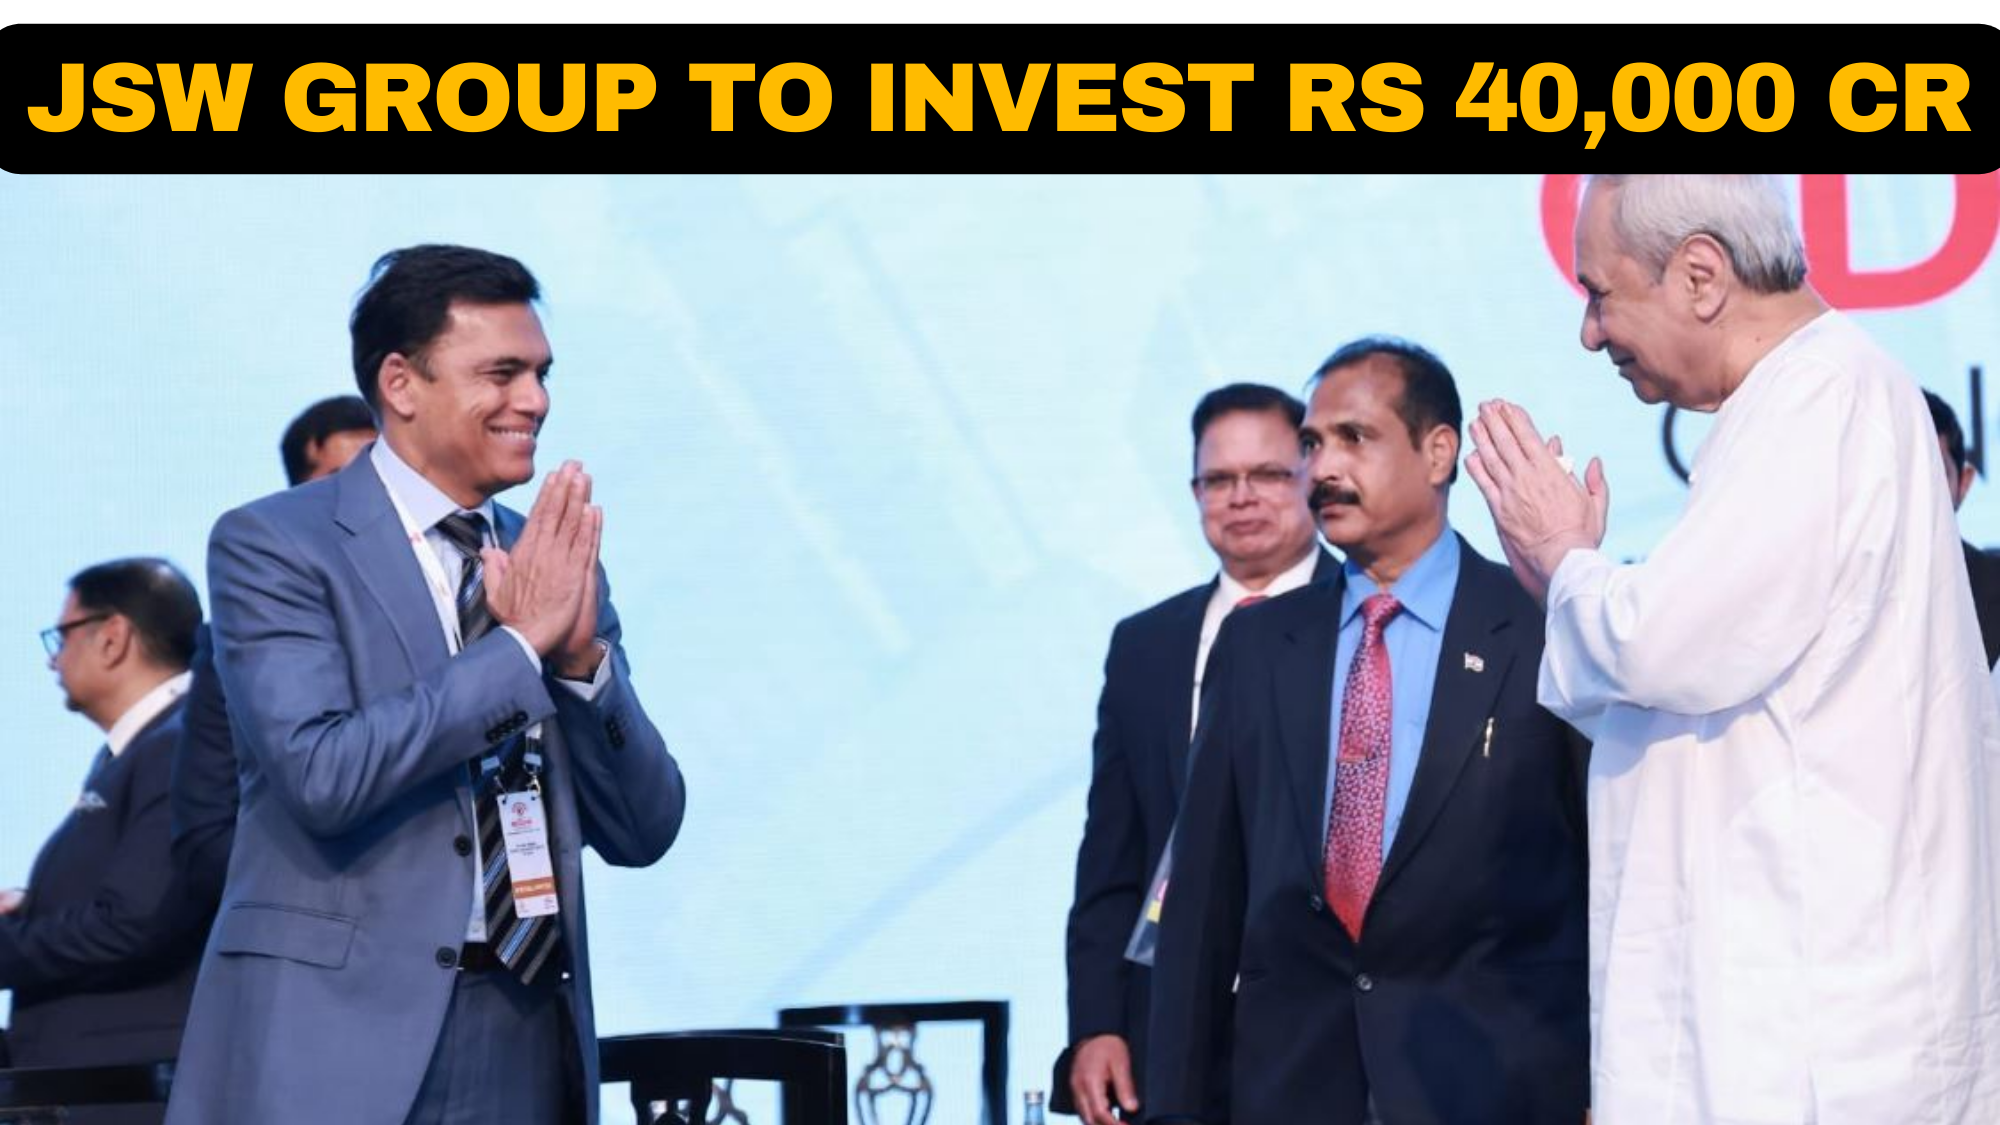 JSW Group's Rs 40,000 crore Strategic Investment